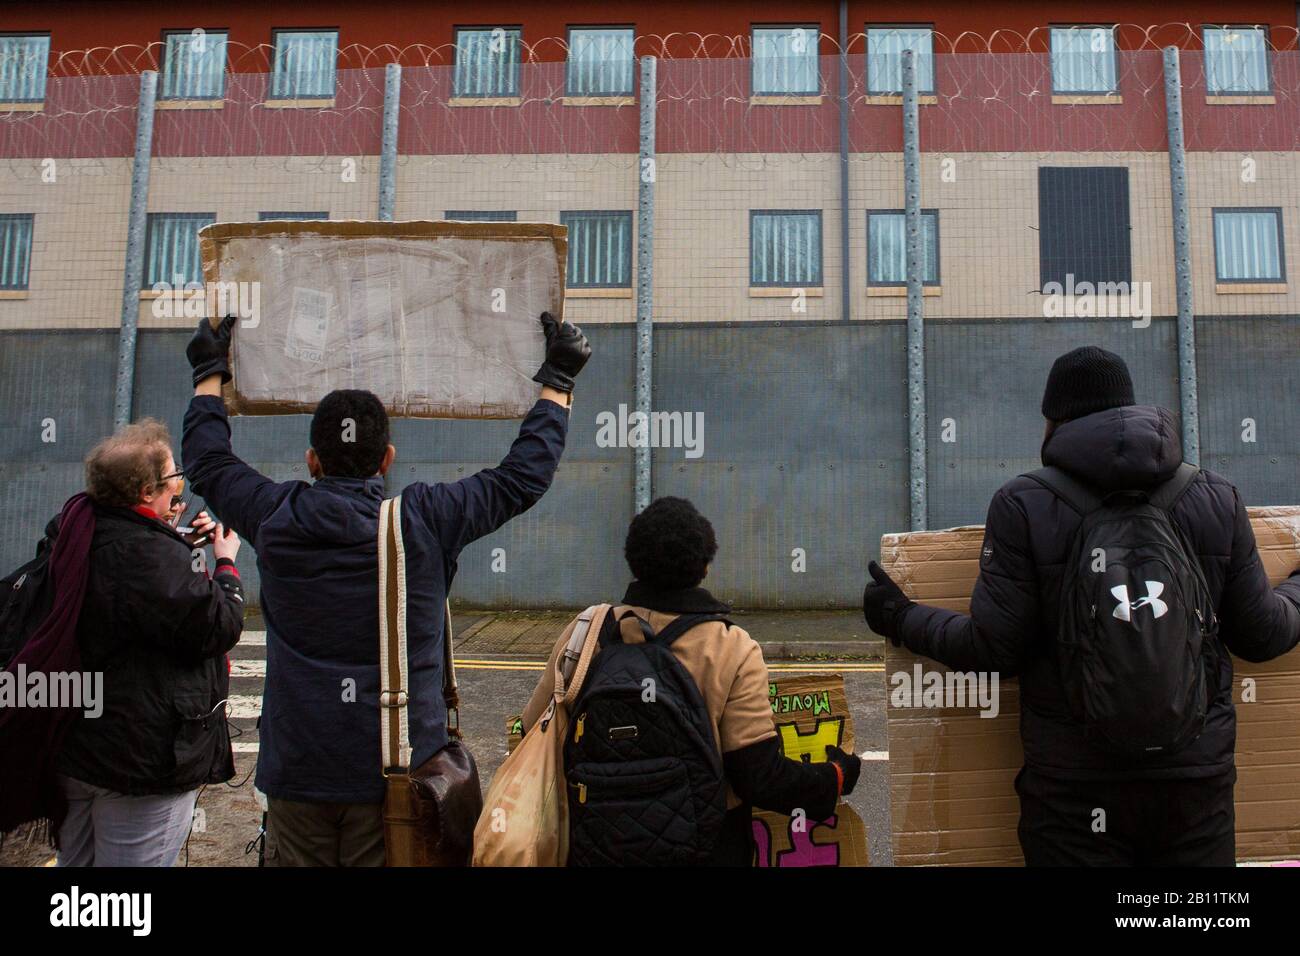 London, UK. 22nd Feb, 2020. Campaigners demonstrate out side Harmondsworth detention centre in support of several people who are faceing deportation to Jamaica. Credit: Thabo Jaiyesimi/Alamy Live News Stock Photo